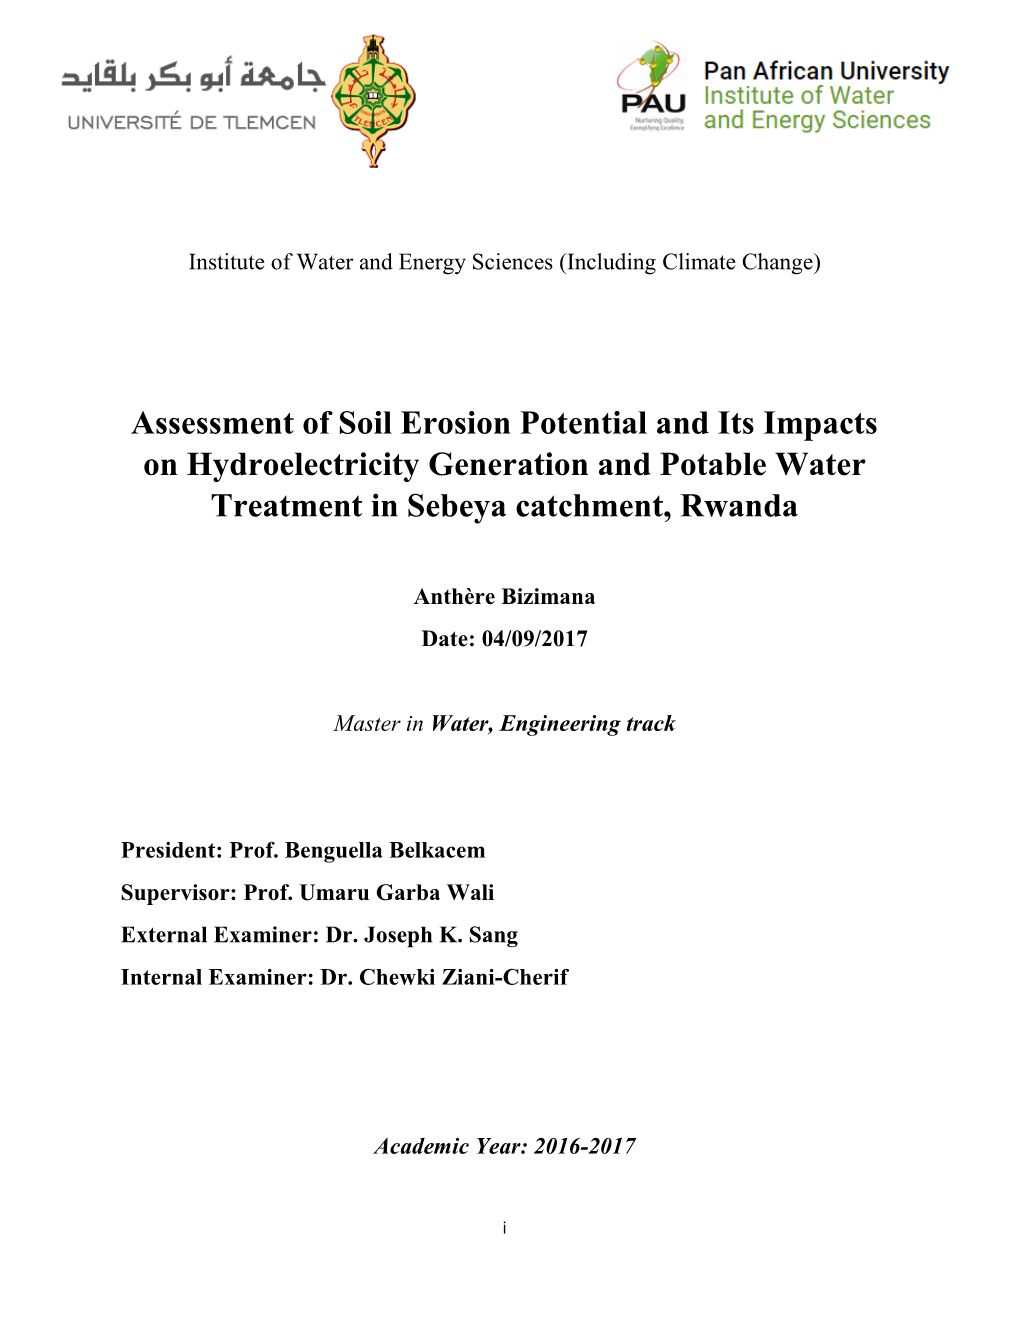 Assessment of Soil Erosion Potential and Its Impacts on Hydroelectricity Generation and Potable Water Treatment in Sebeya Catchment, Rwanda